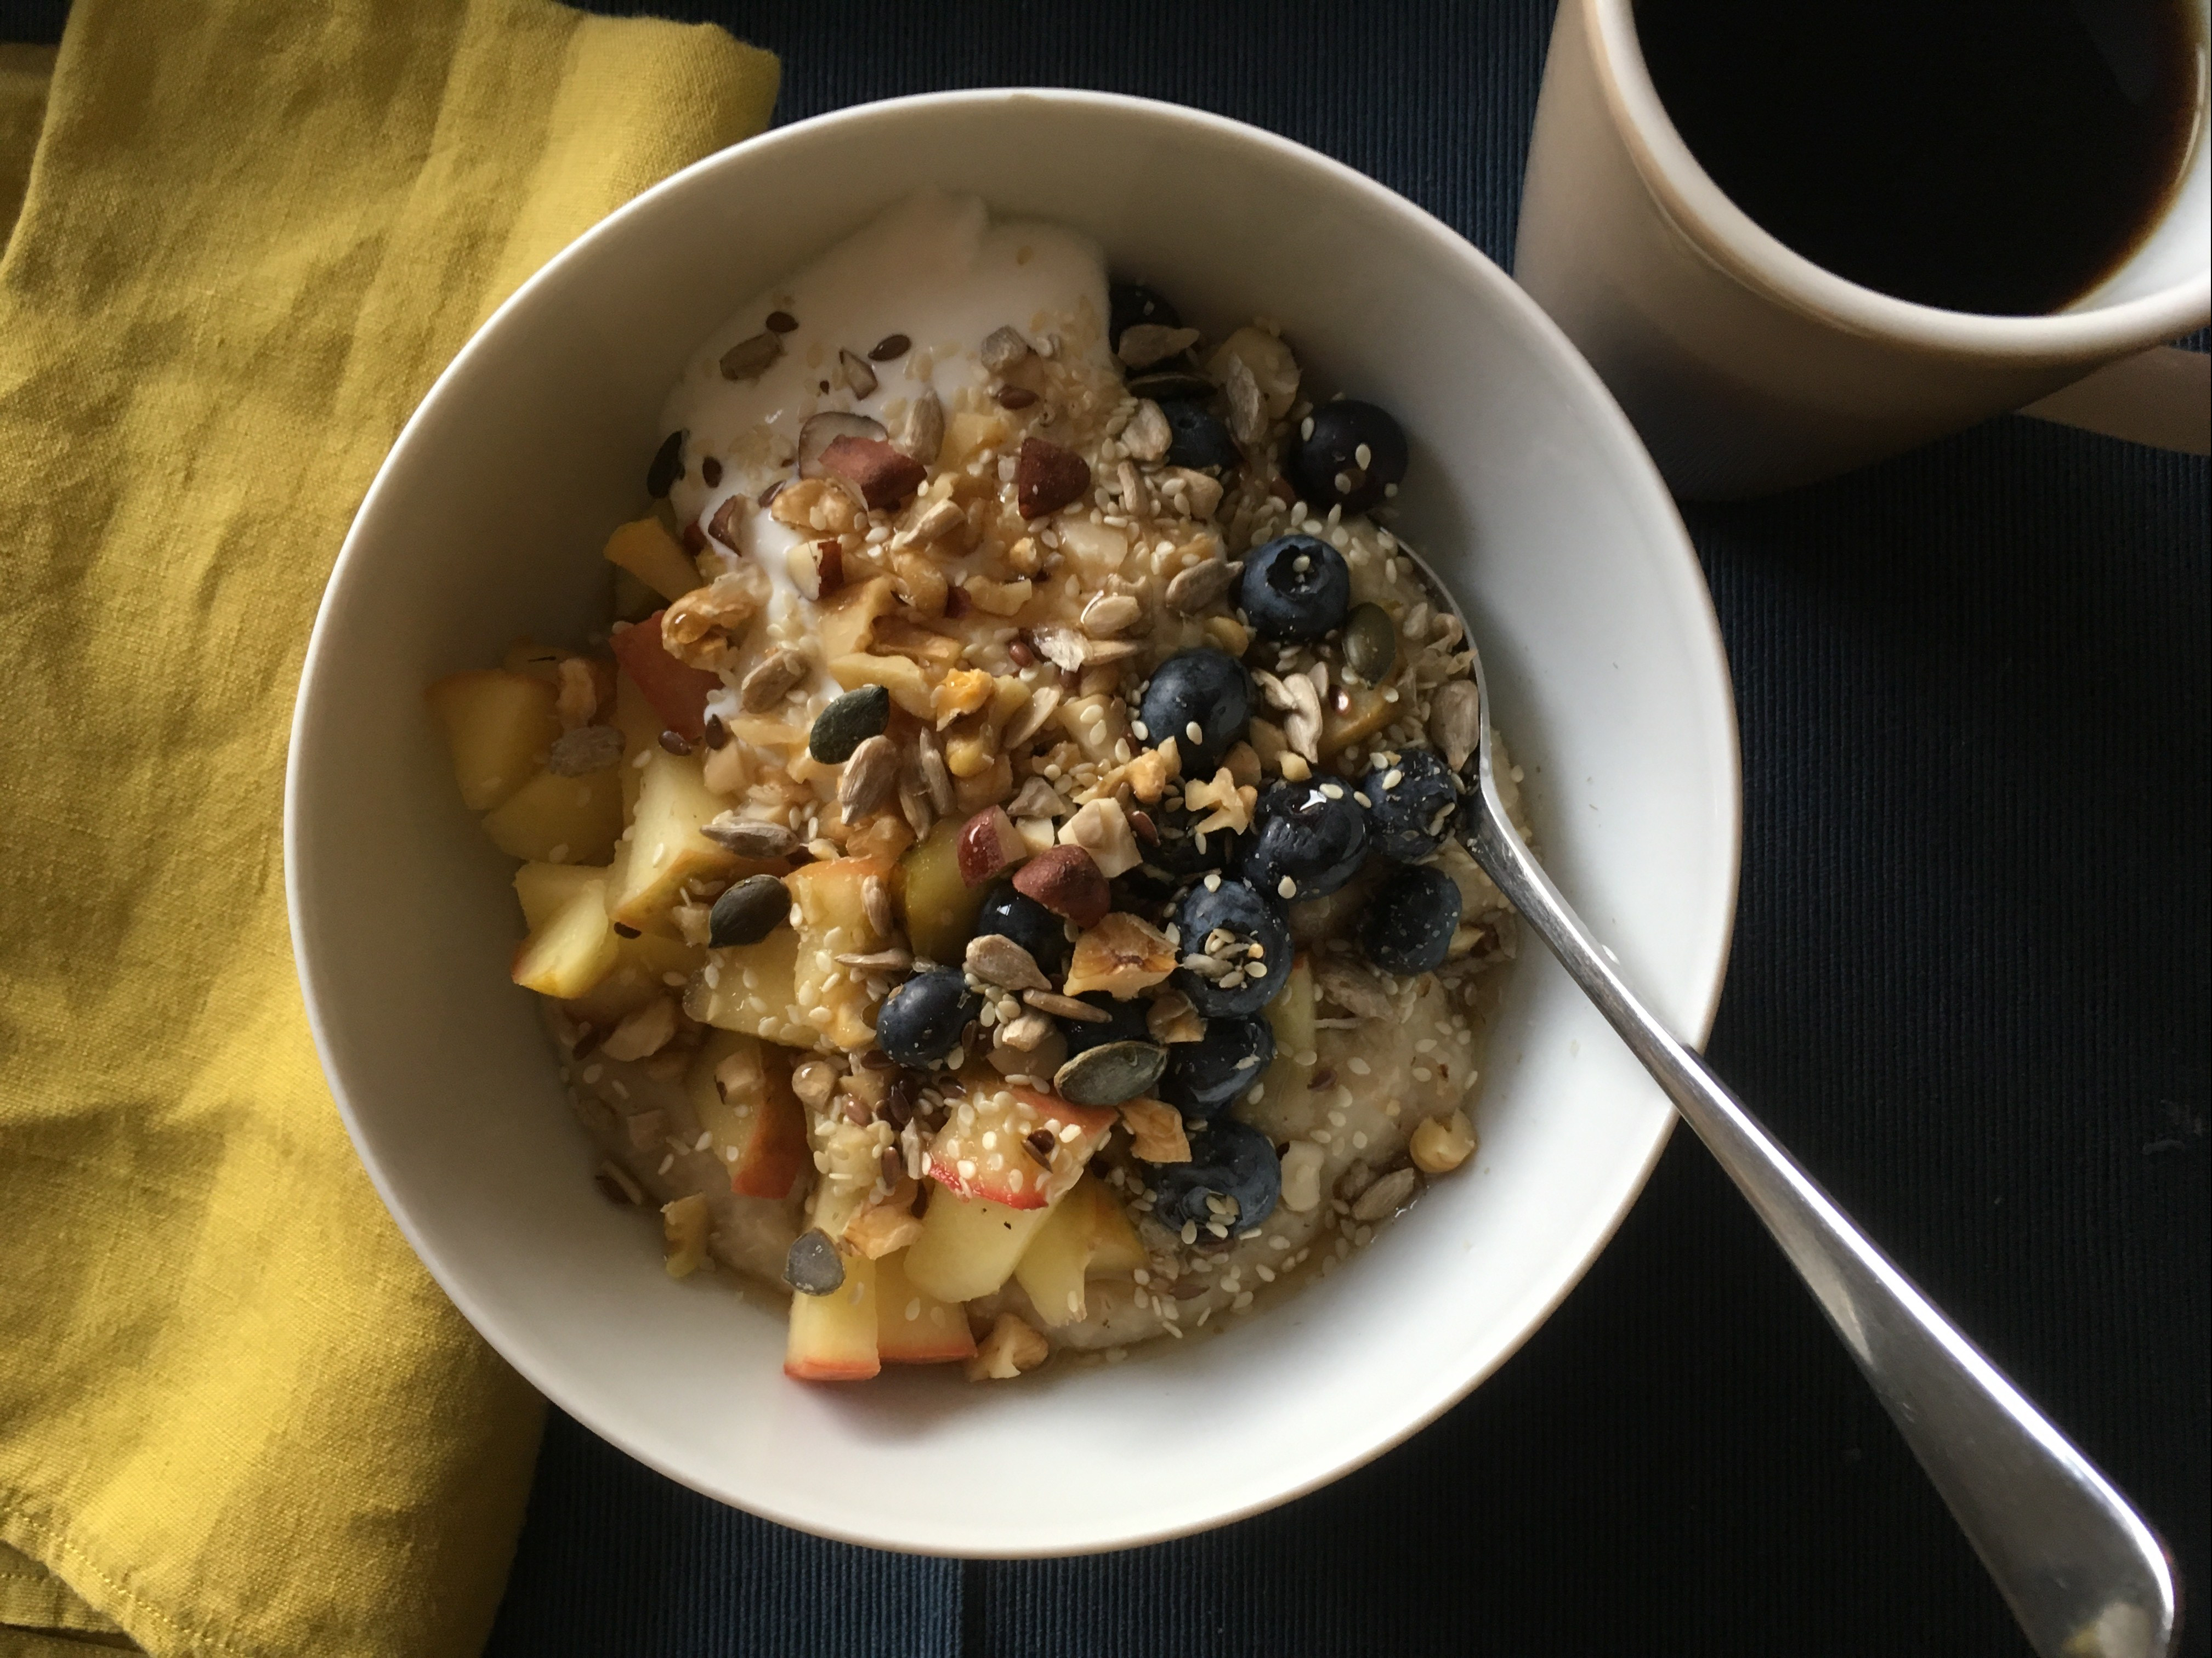 Porridge with apple compote, blueberries, nuts and seeds